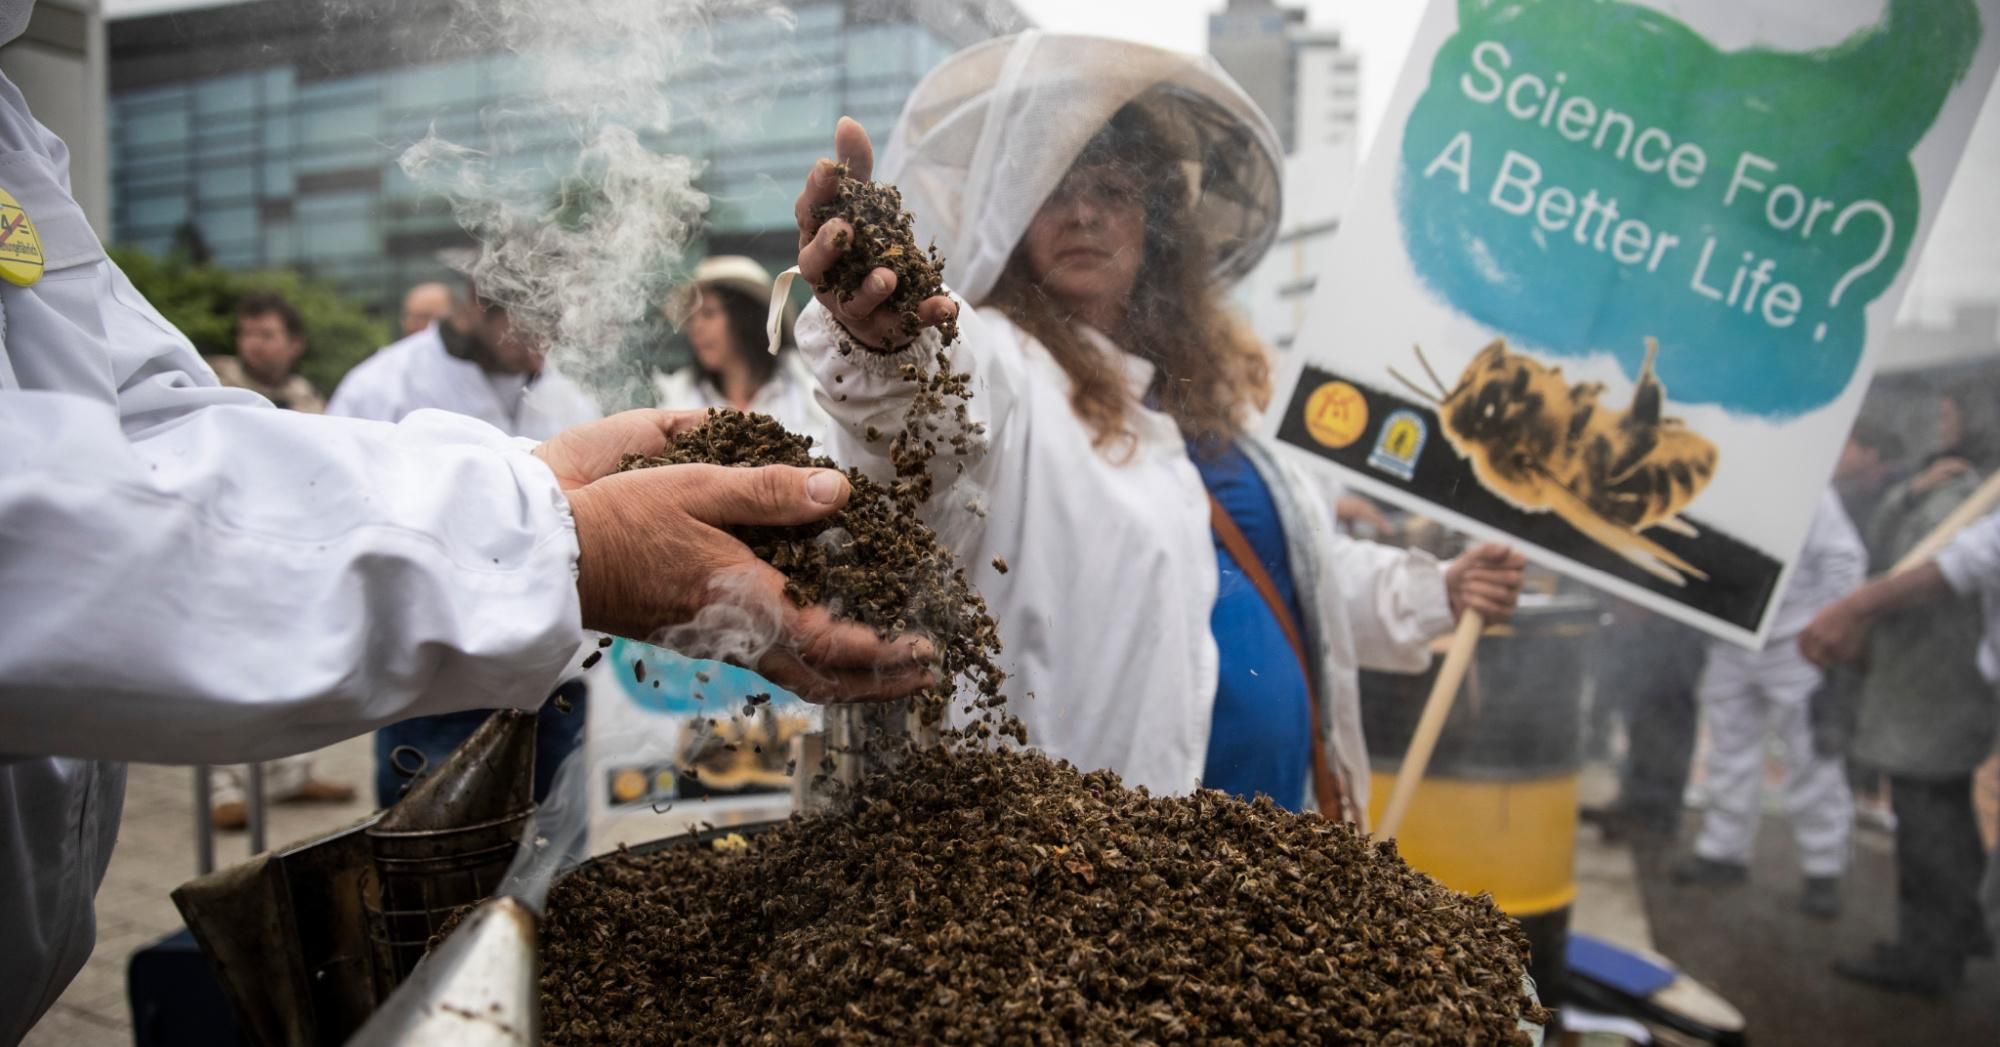 Protesters hold bees killed by pesticides prior to the annual shareholders meeting of German chemicals and pharmaceuticals conglomerate Bayer AG on April 26, 2019 in Bonn, Germany. (Photo: Maja Hitij via Getty Images)